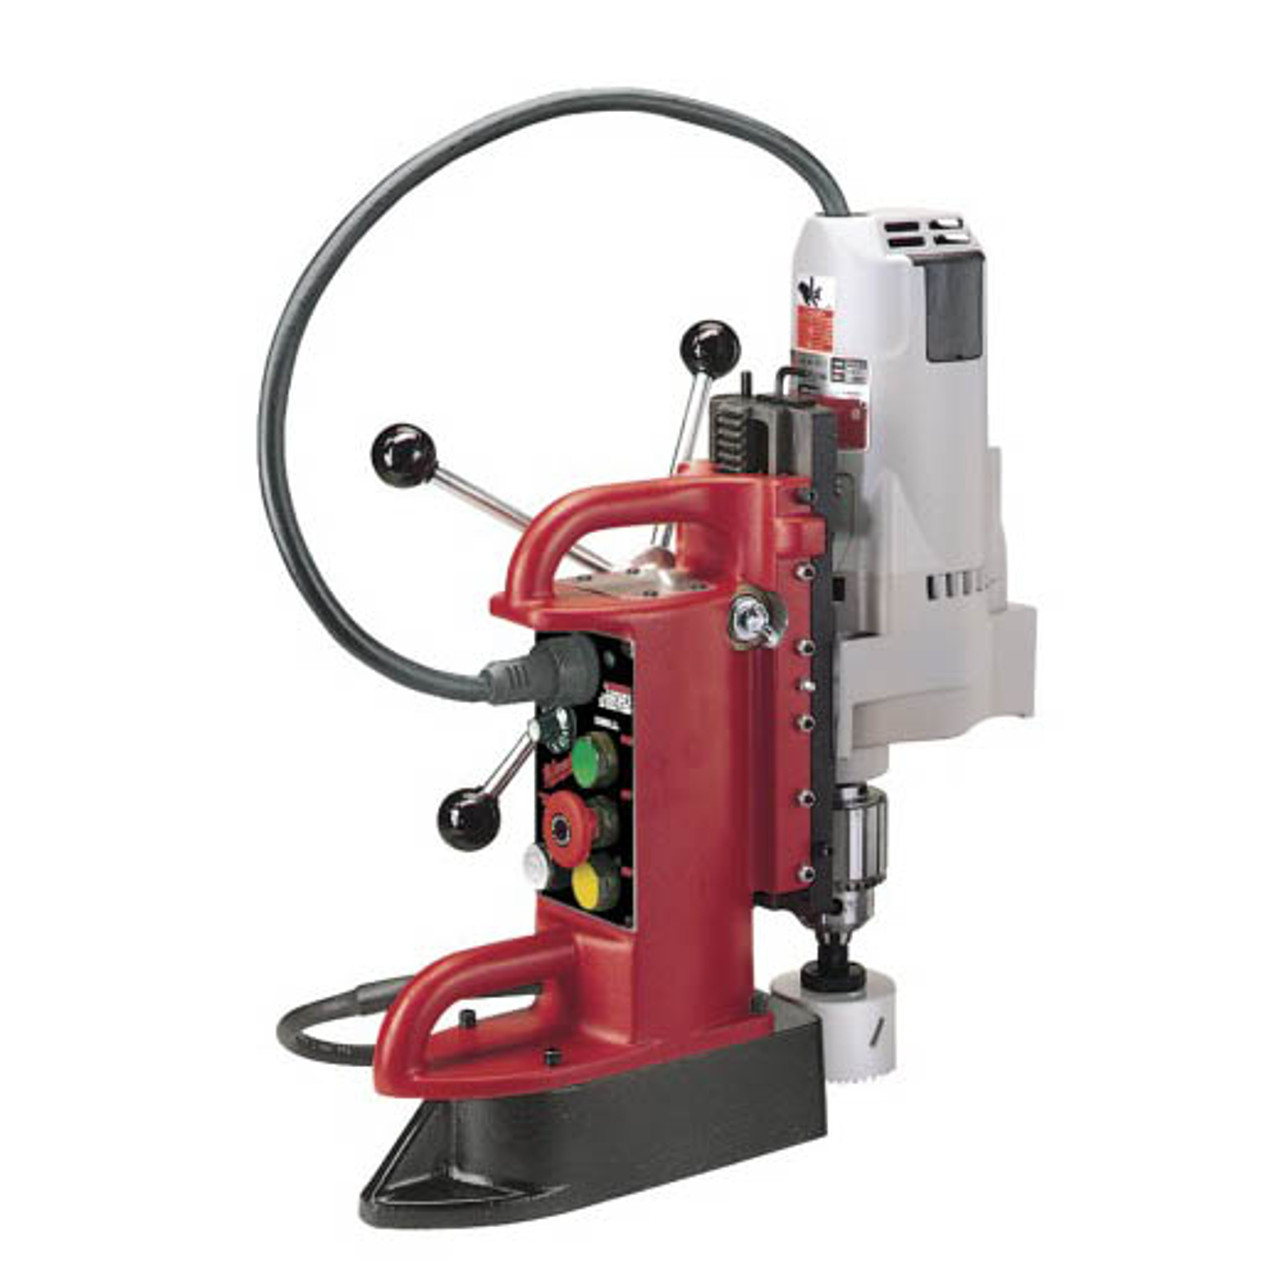 Fixed Position Electromagnetic Drill Press with 3/4" Motor